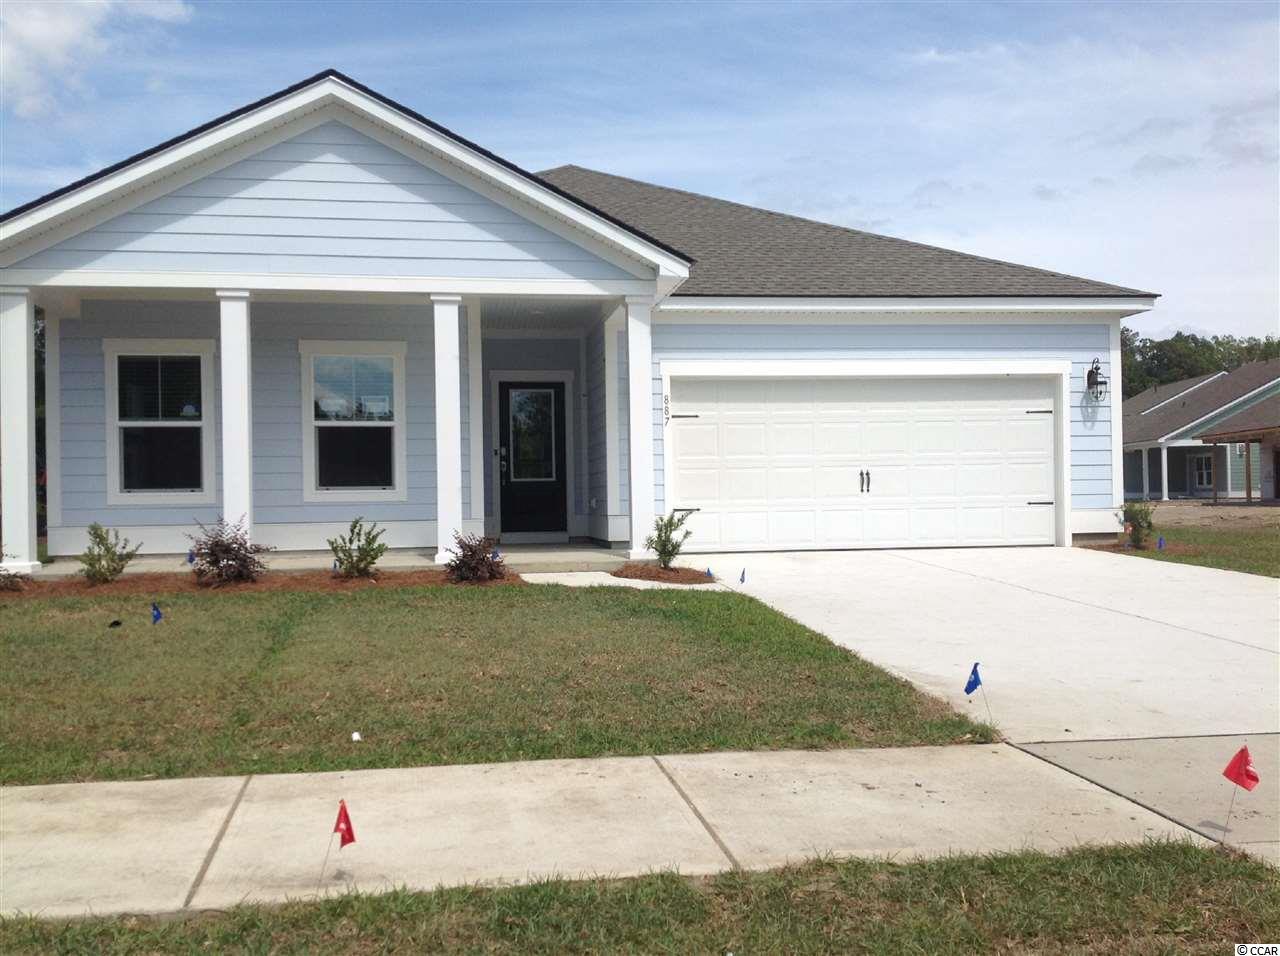 887 Mourning Dove Dr. Myrtle Beach, SC 29577